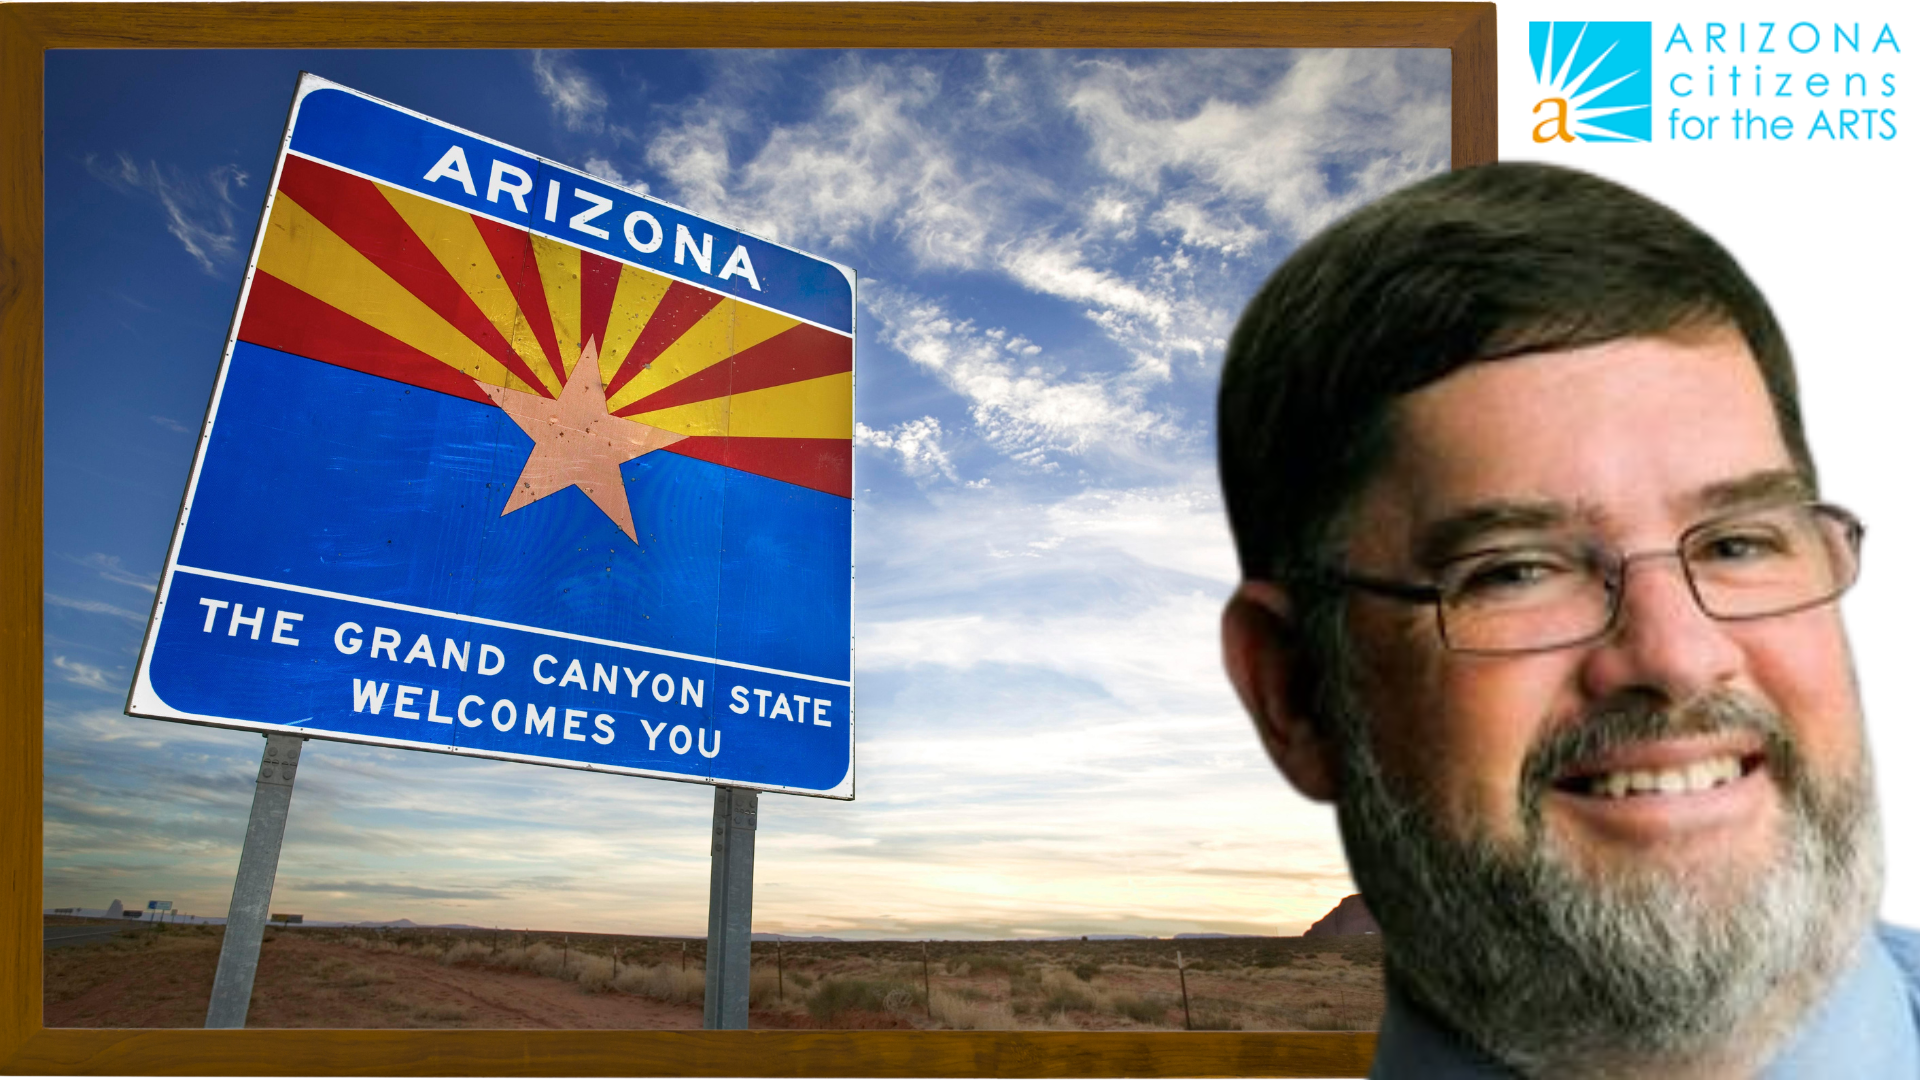 A photograph features a desert road in Arizona, with an Arizona highway sign that reads "The Grand Canyon State welcomes you". On the right side, Patrick McWhorter's face (a light skinned man with short dark hair, oval glasses and a salt and pepper beard) and the Arizona Citizens for the Arts logo are shown.